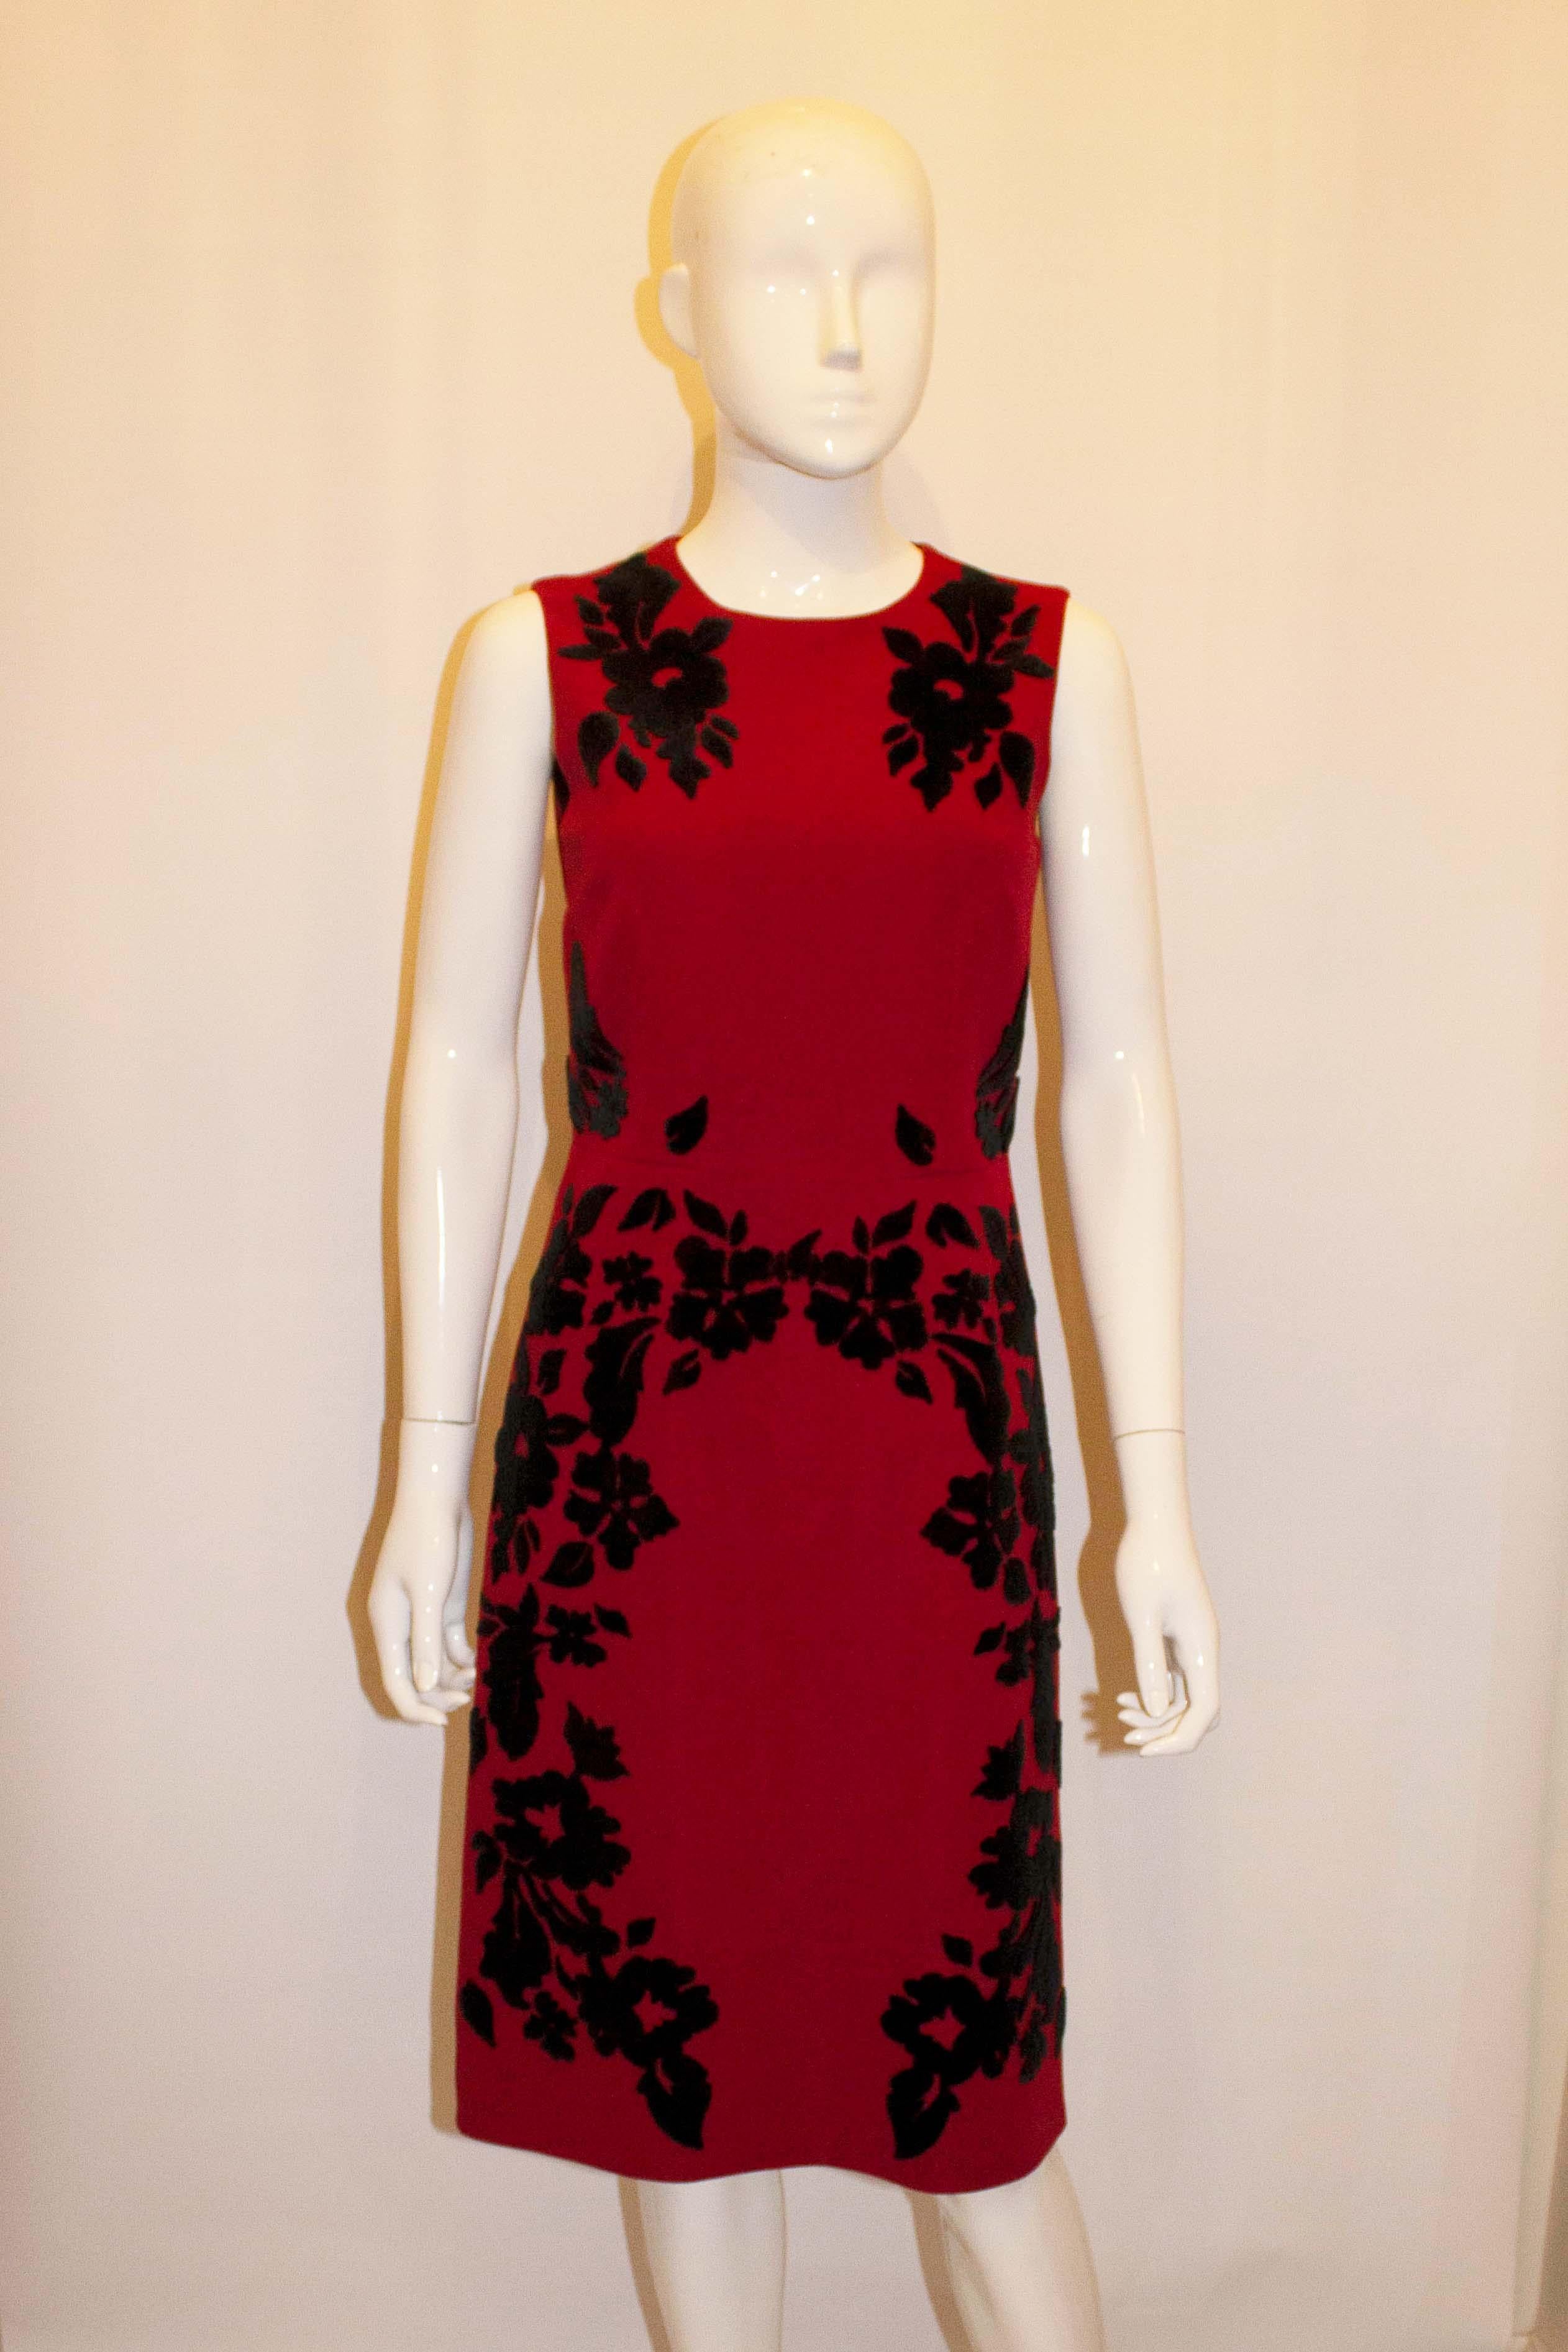 A fun dress for the festive season by Dolce and Gabanna. The dress  is in a red wool with black applique detail. It has wonderful tailoring, a back central zip and is fully lined. 
Measurements : Bust up to 35'', length 41''